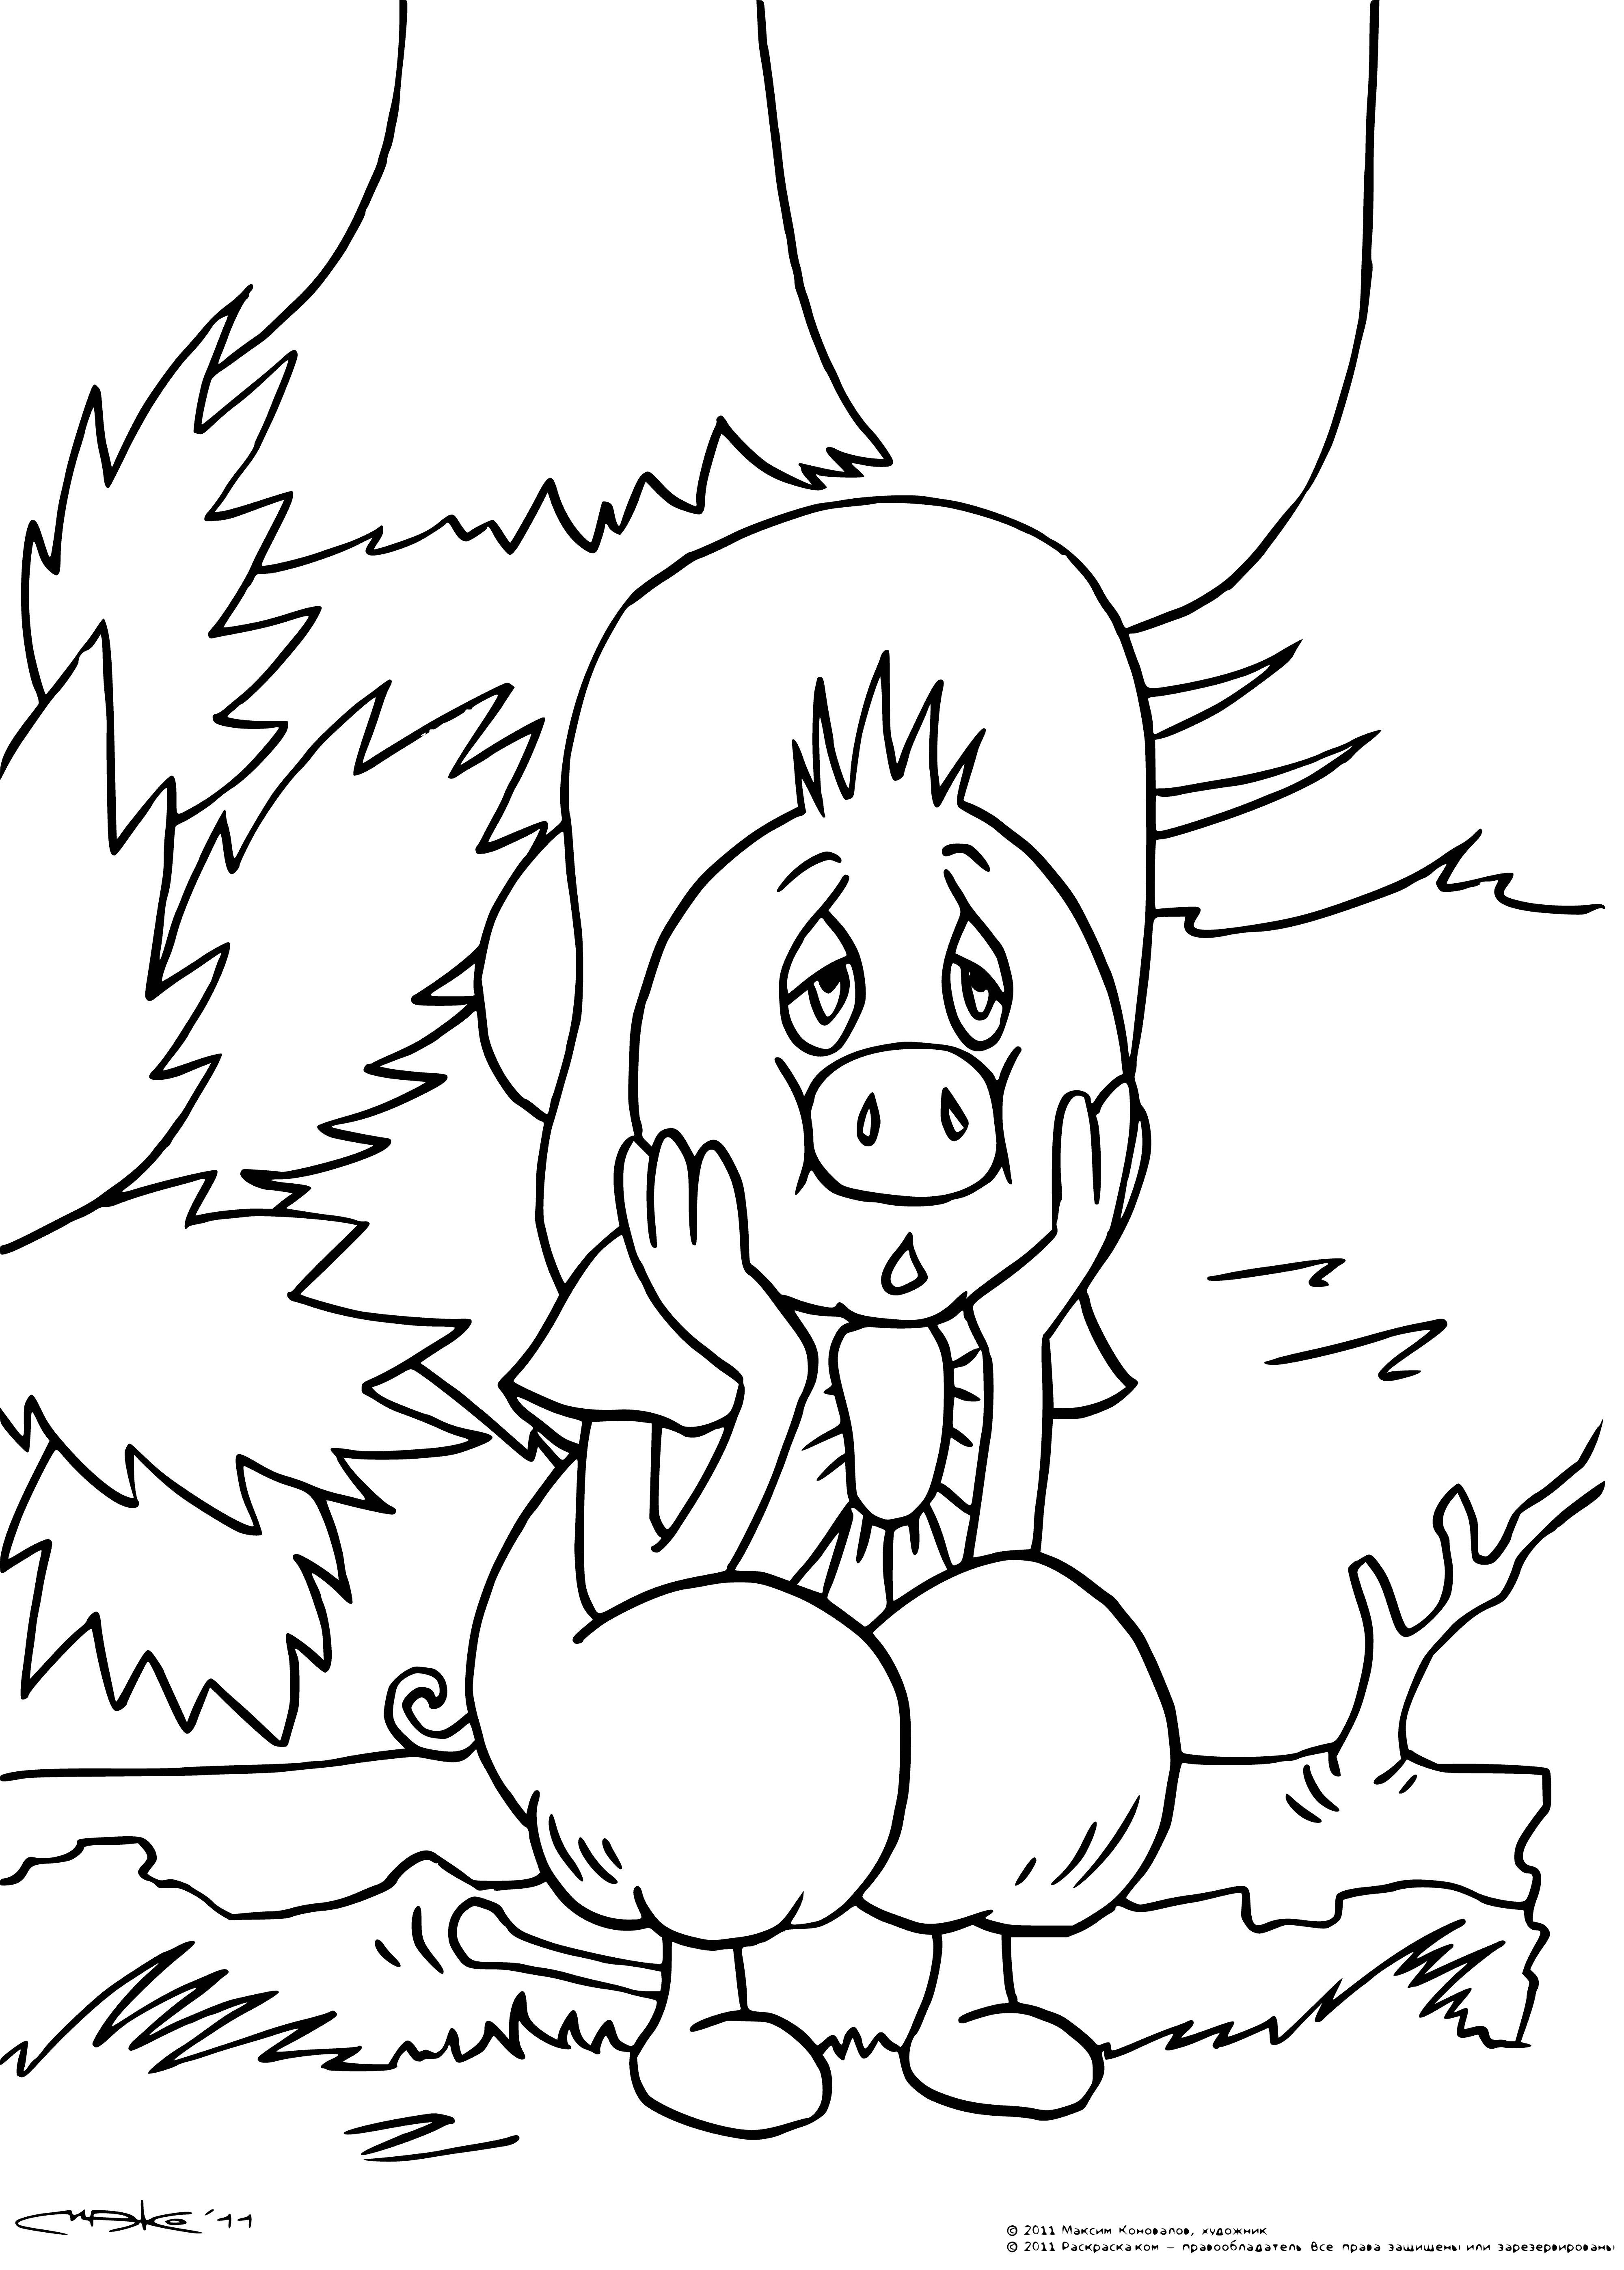 coloring page: Funtik is a pig exploring a cave, holding a torch and a rock, having lots of fun! #theadventuresoffuntik